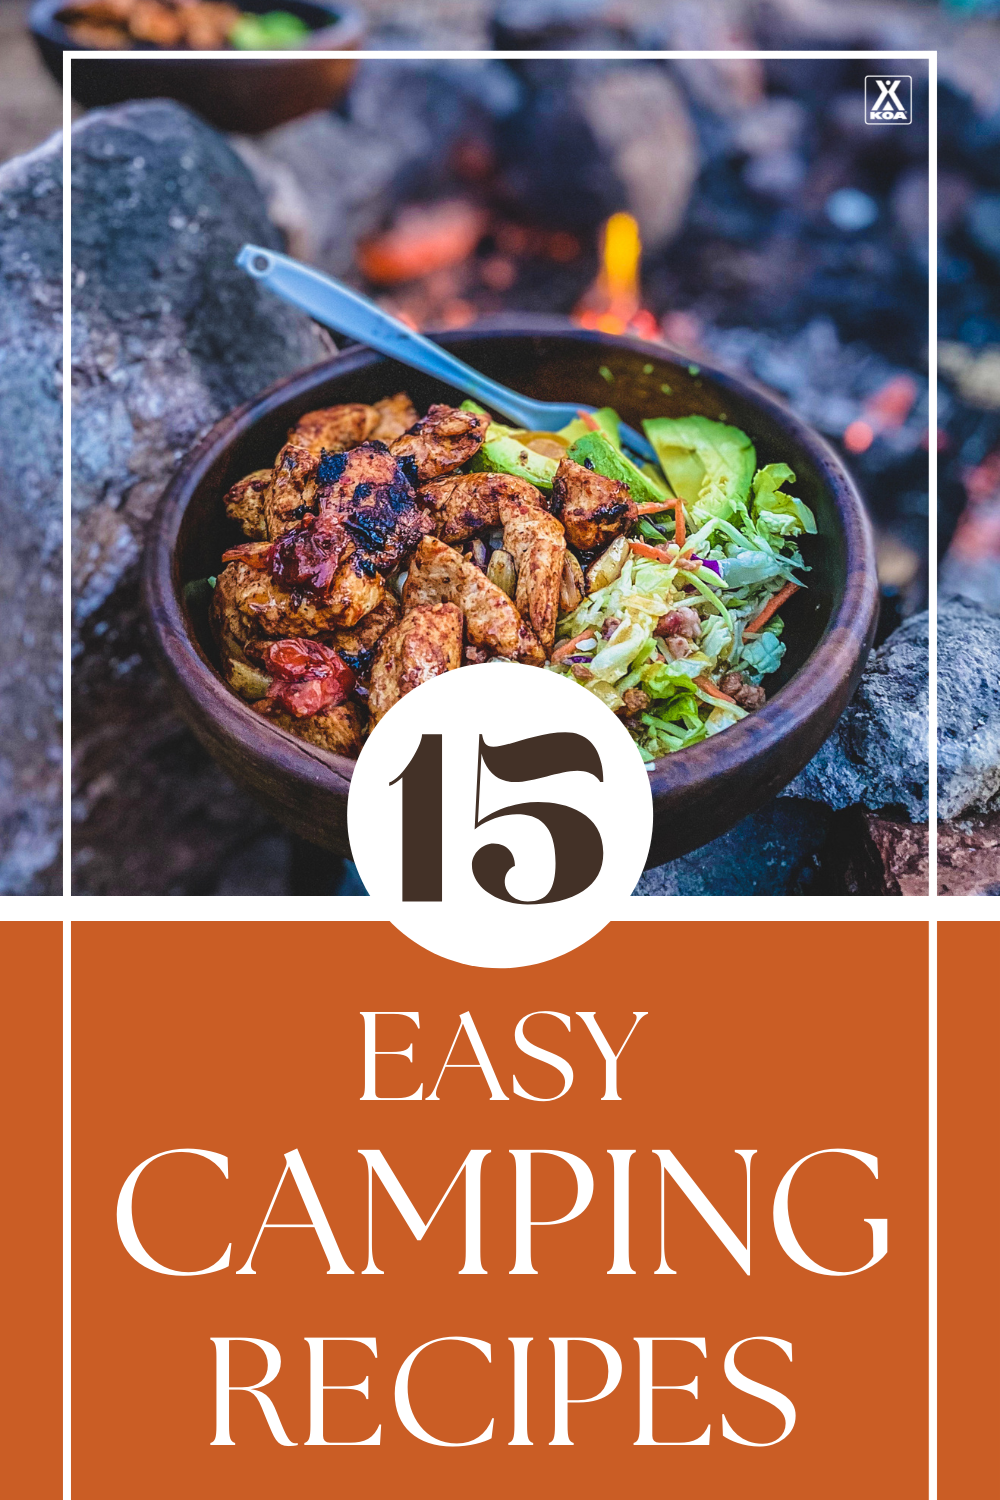 Looking for something easy to make for breakfast, lunch or dinner on your next camping trip. Try one of these easy camping recipes.